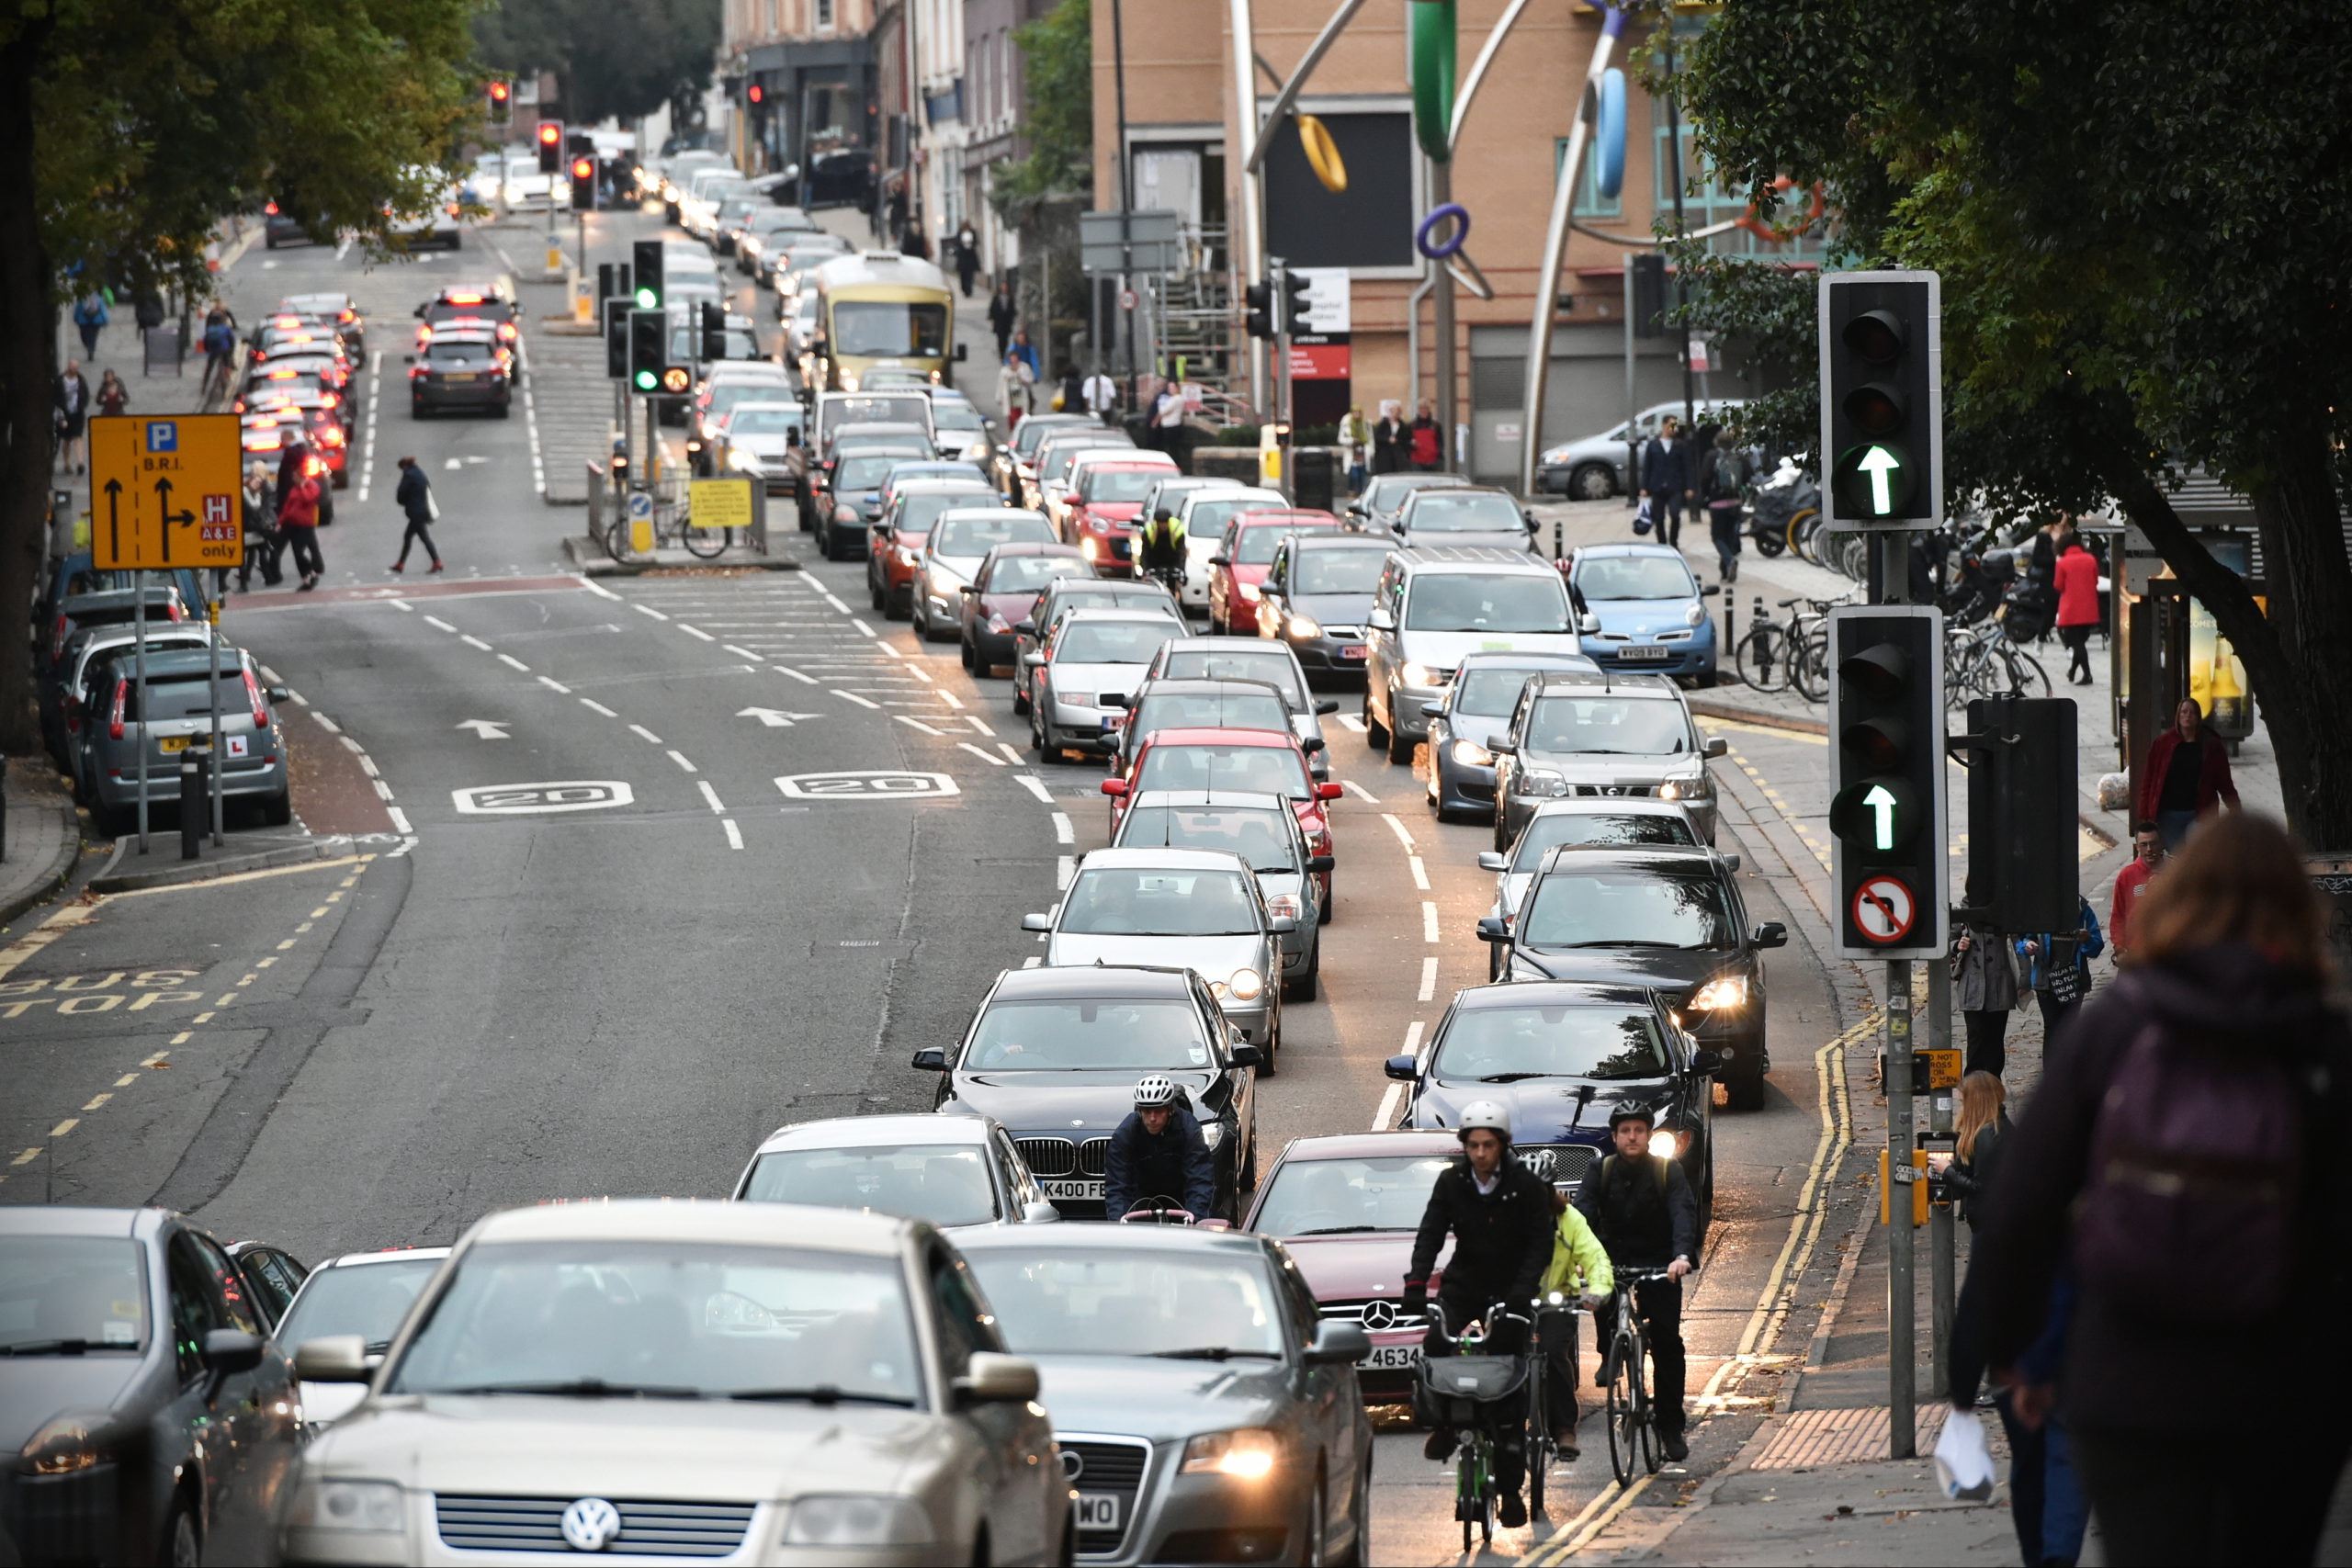 What do falls in motorised traffic mean for air quality?